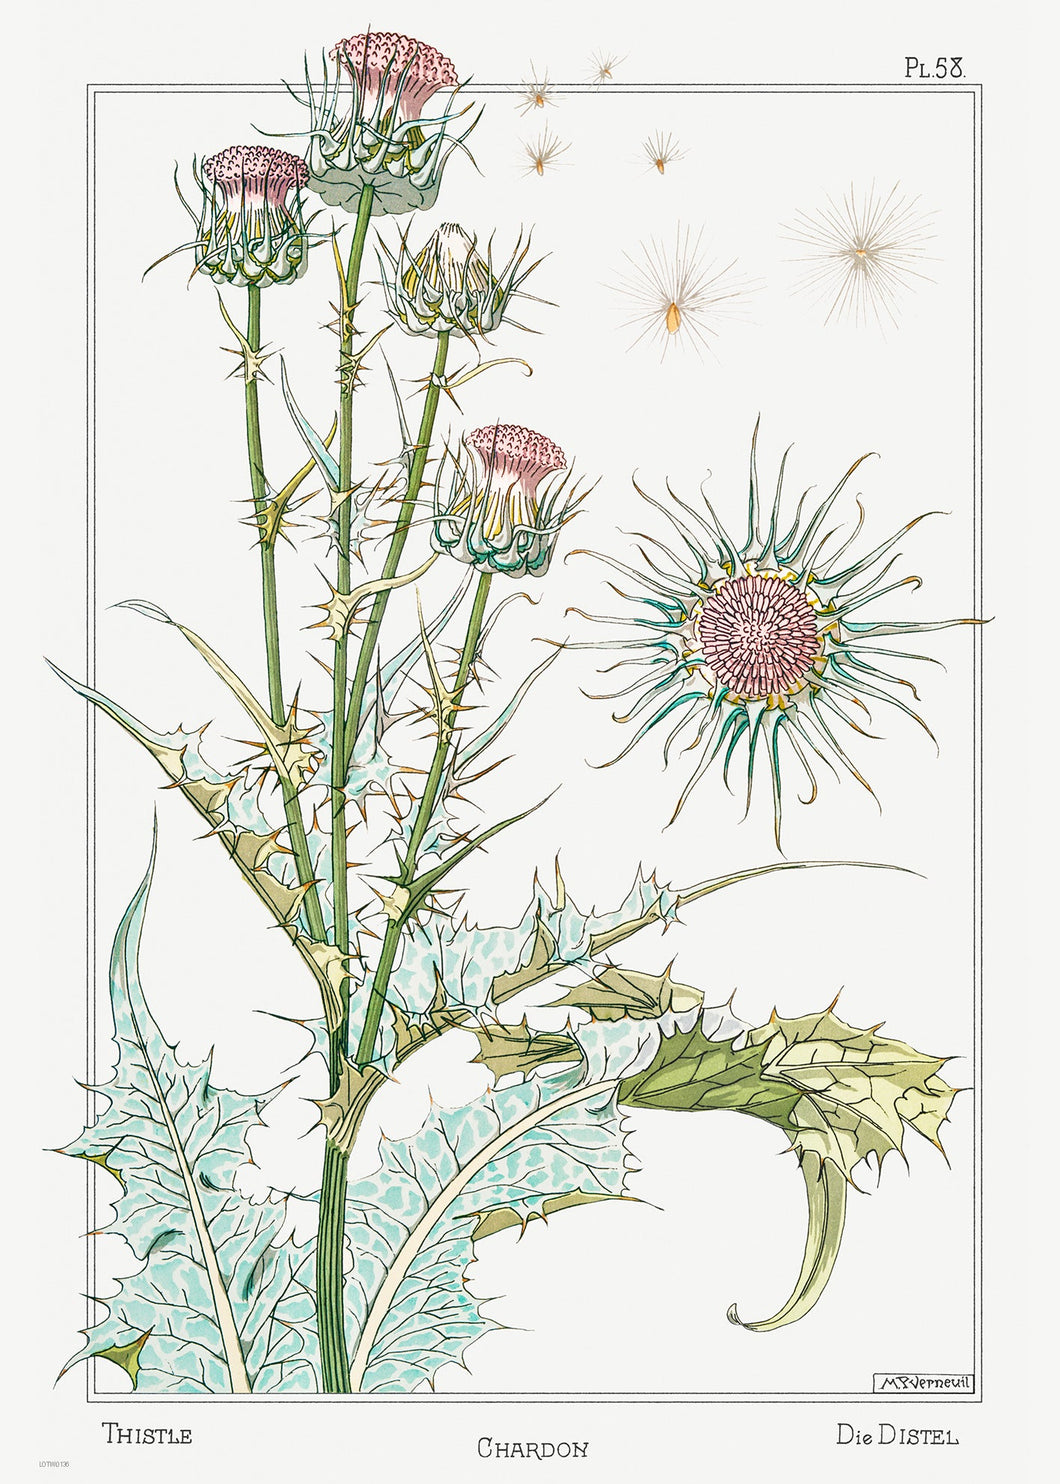 Botanical 50x70cm Art Print Chardon (thistle) from La Plante et ses Applications ornementales (1896) illustrated by Maurice Pillard Verneuil. 